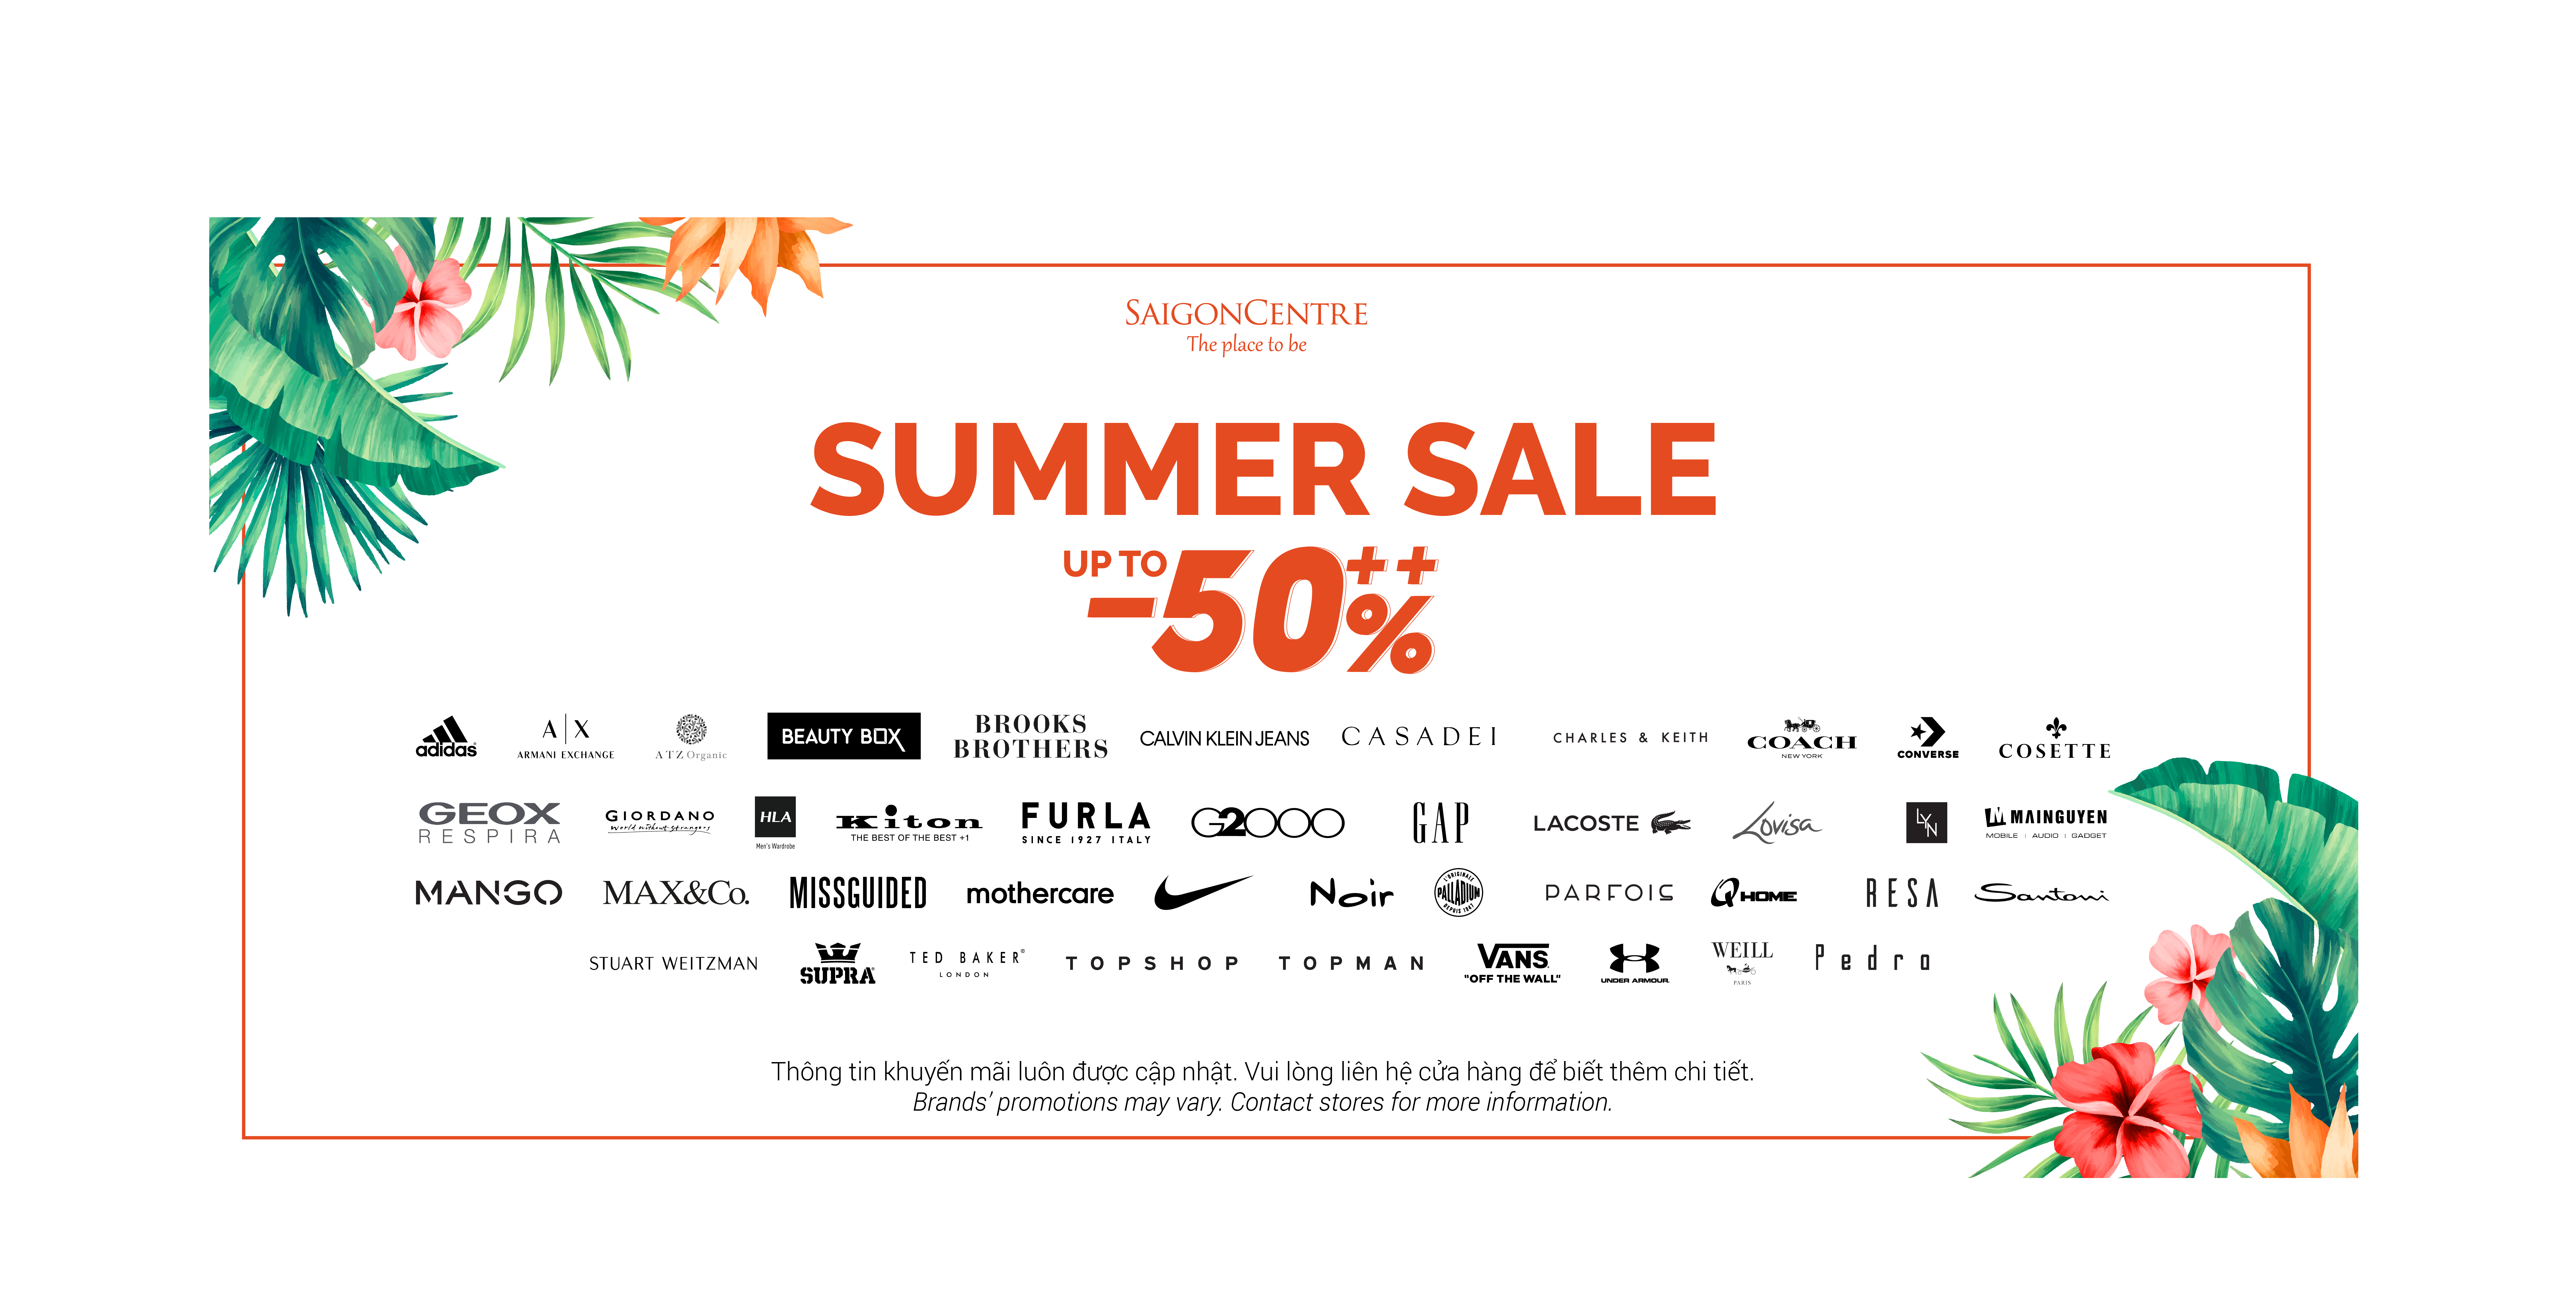 SUMMER SALE UP TO 50% AT SAIGON CENTRE